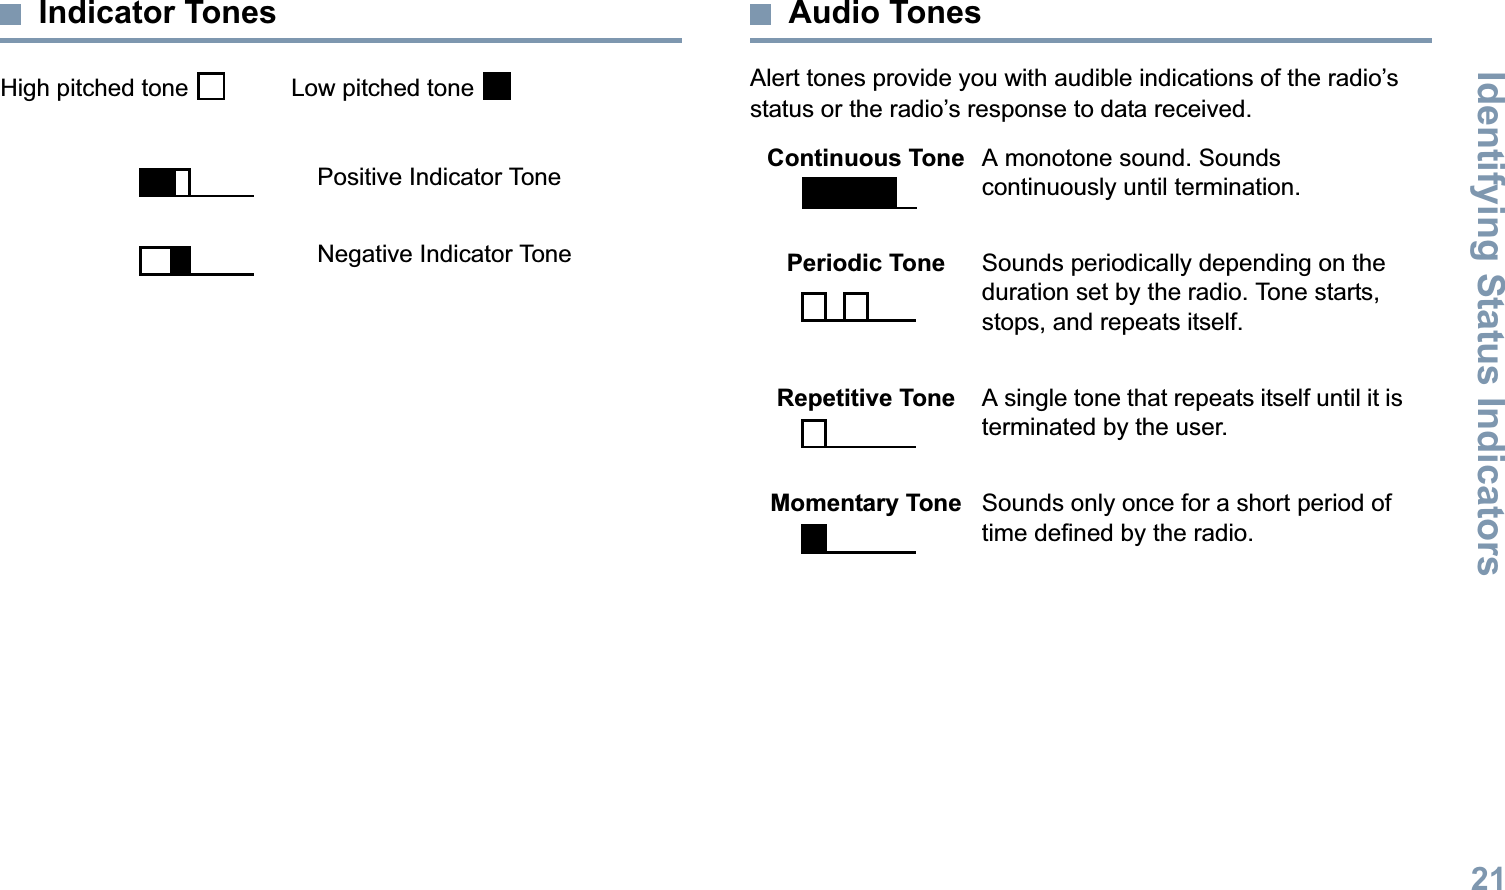 Identifying Status IndicatorsEnglish21Indicator TonesHigh pitched tone    Low pitched tone Audio TonesAlert tones provide you with audible indications of the radio’s status or the radio’s response to data received.Positive Indicator ToneNegative Indicator ToneContinuous Tone A monotone sound. Sounds continuously until termination.Periodic Tone Sounds periodically depending on the duration set by the radio. Tone starts, stops, and repeats itself.Repetitive Tone A single tone that repeats itself until it is terminated by the user.Momentary Tone Sounds only once for a short period of time defined by the radio.